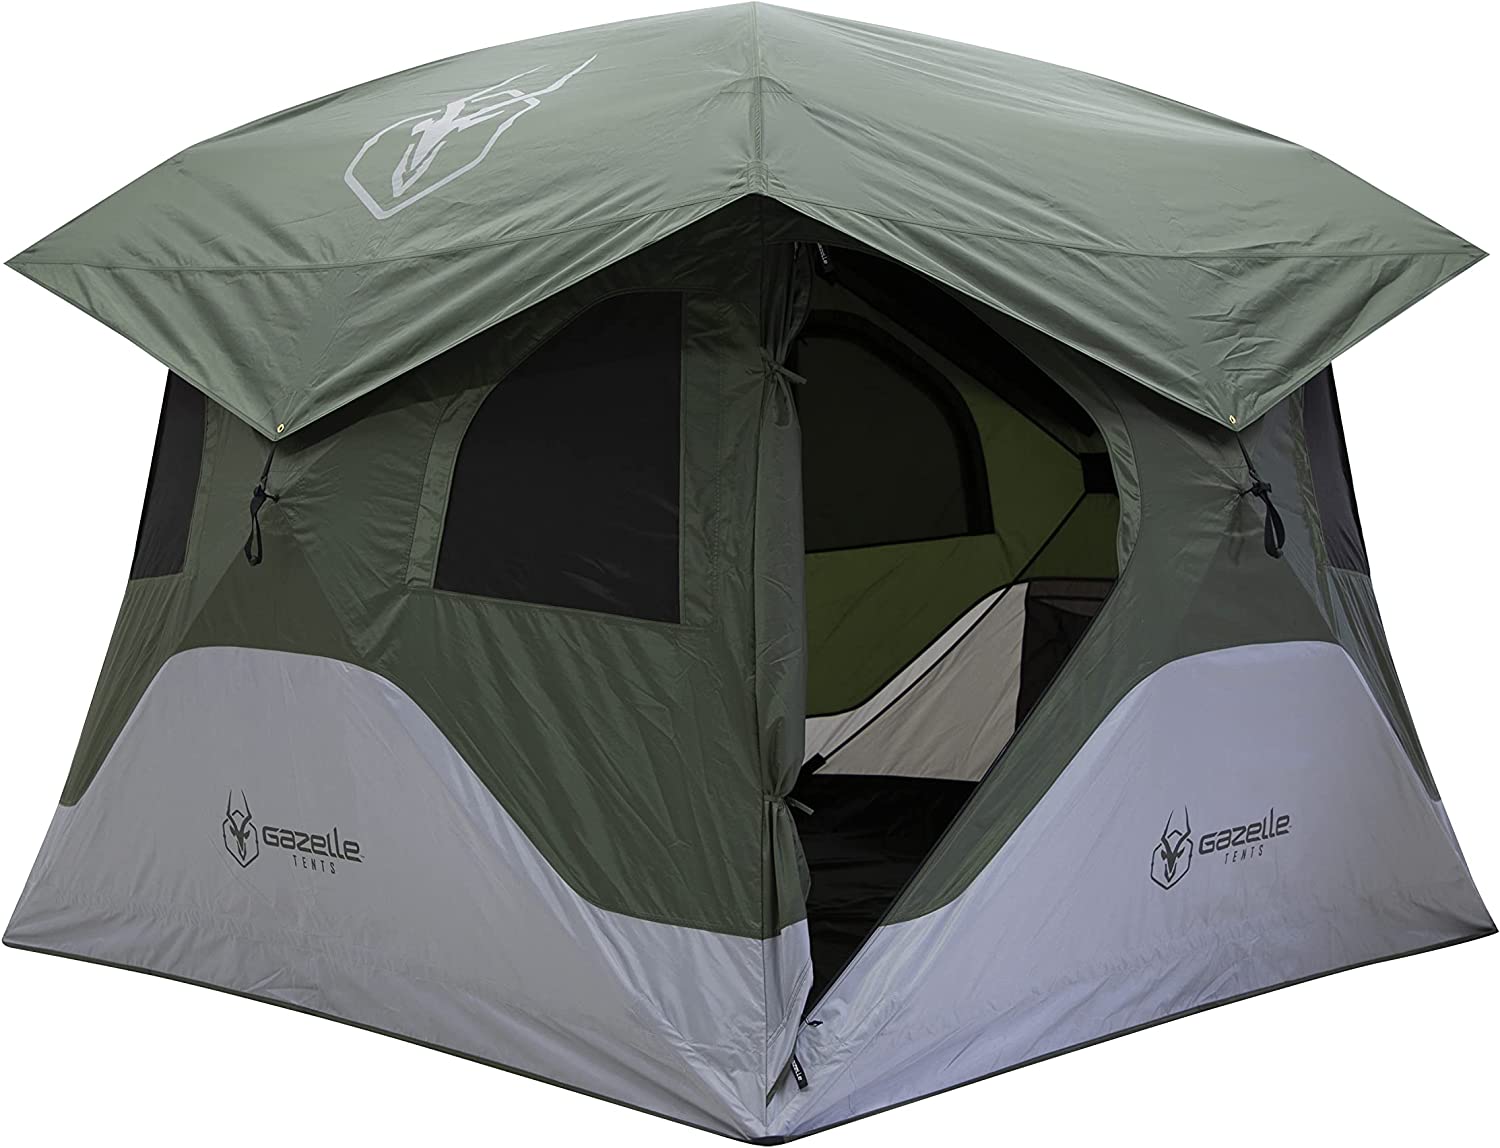 Gazelle Tents 22272 T4 Pop-Up Portable 2 Door Camping Hub Tent with Removable Floor and Rain Fly, Easy Instant Set Up in 90 Seconds, 4 Person